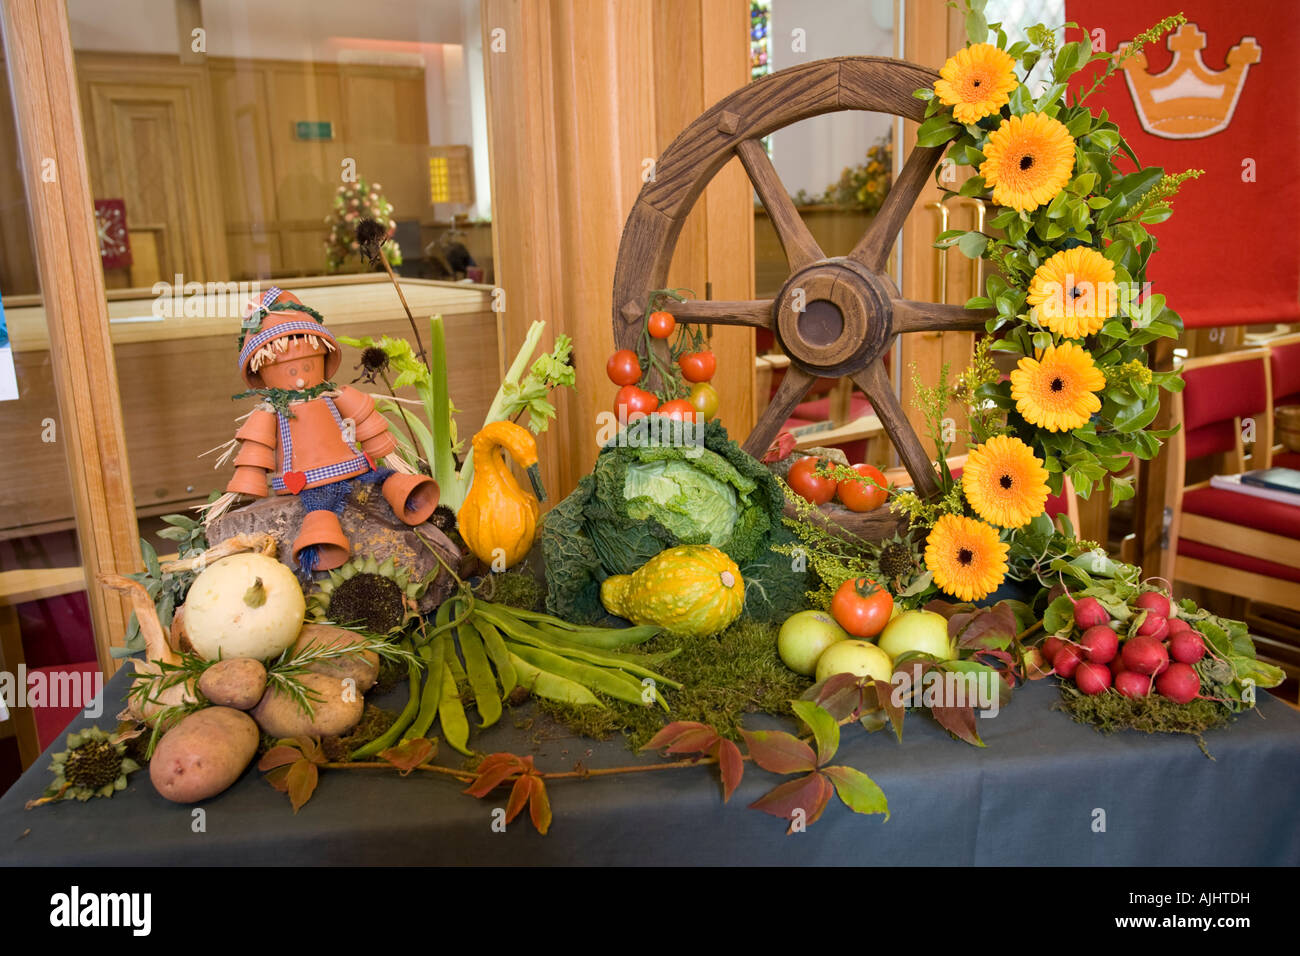 Attractive harvest festival display flower pot man fruit flowers and vegetables arranged around wagon wheel at church entrance Stock Photo